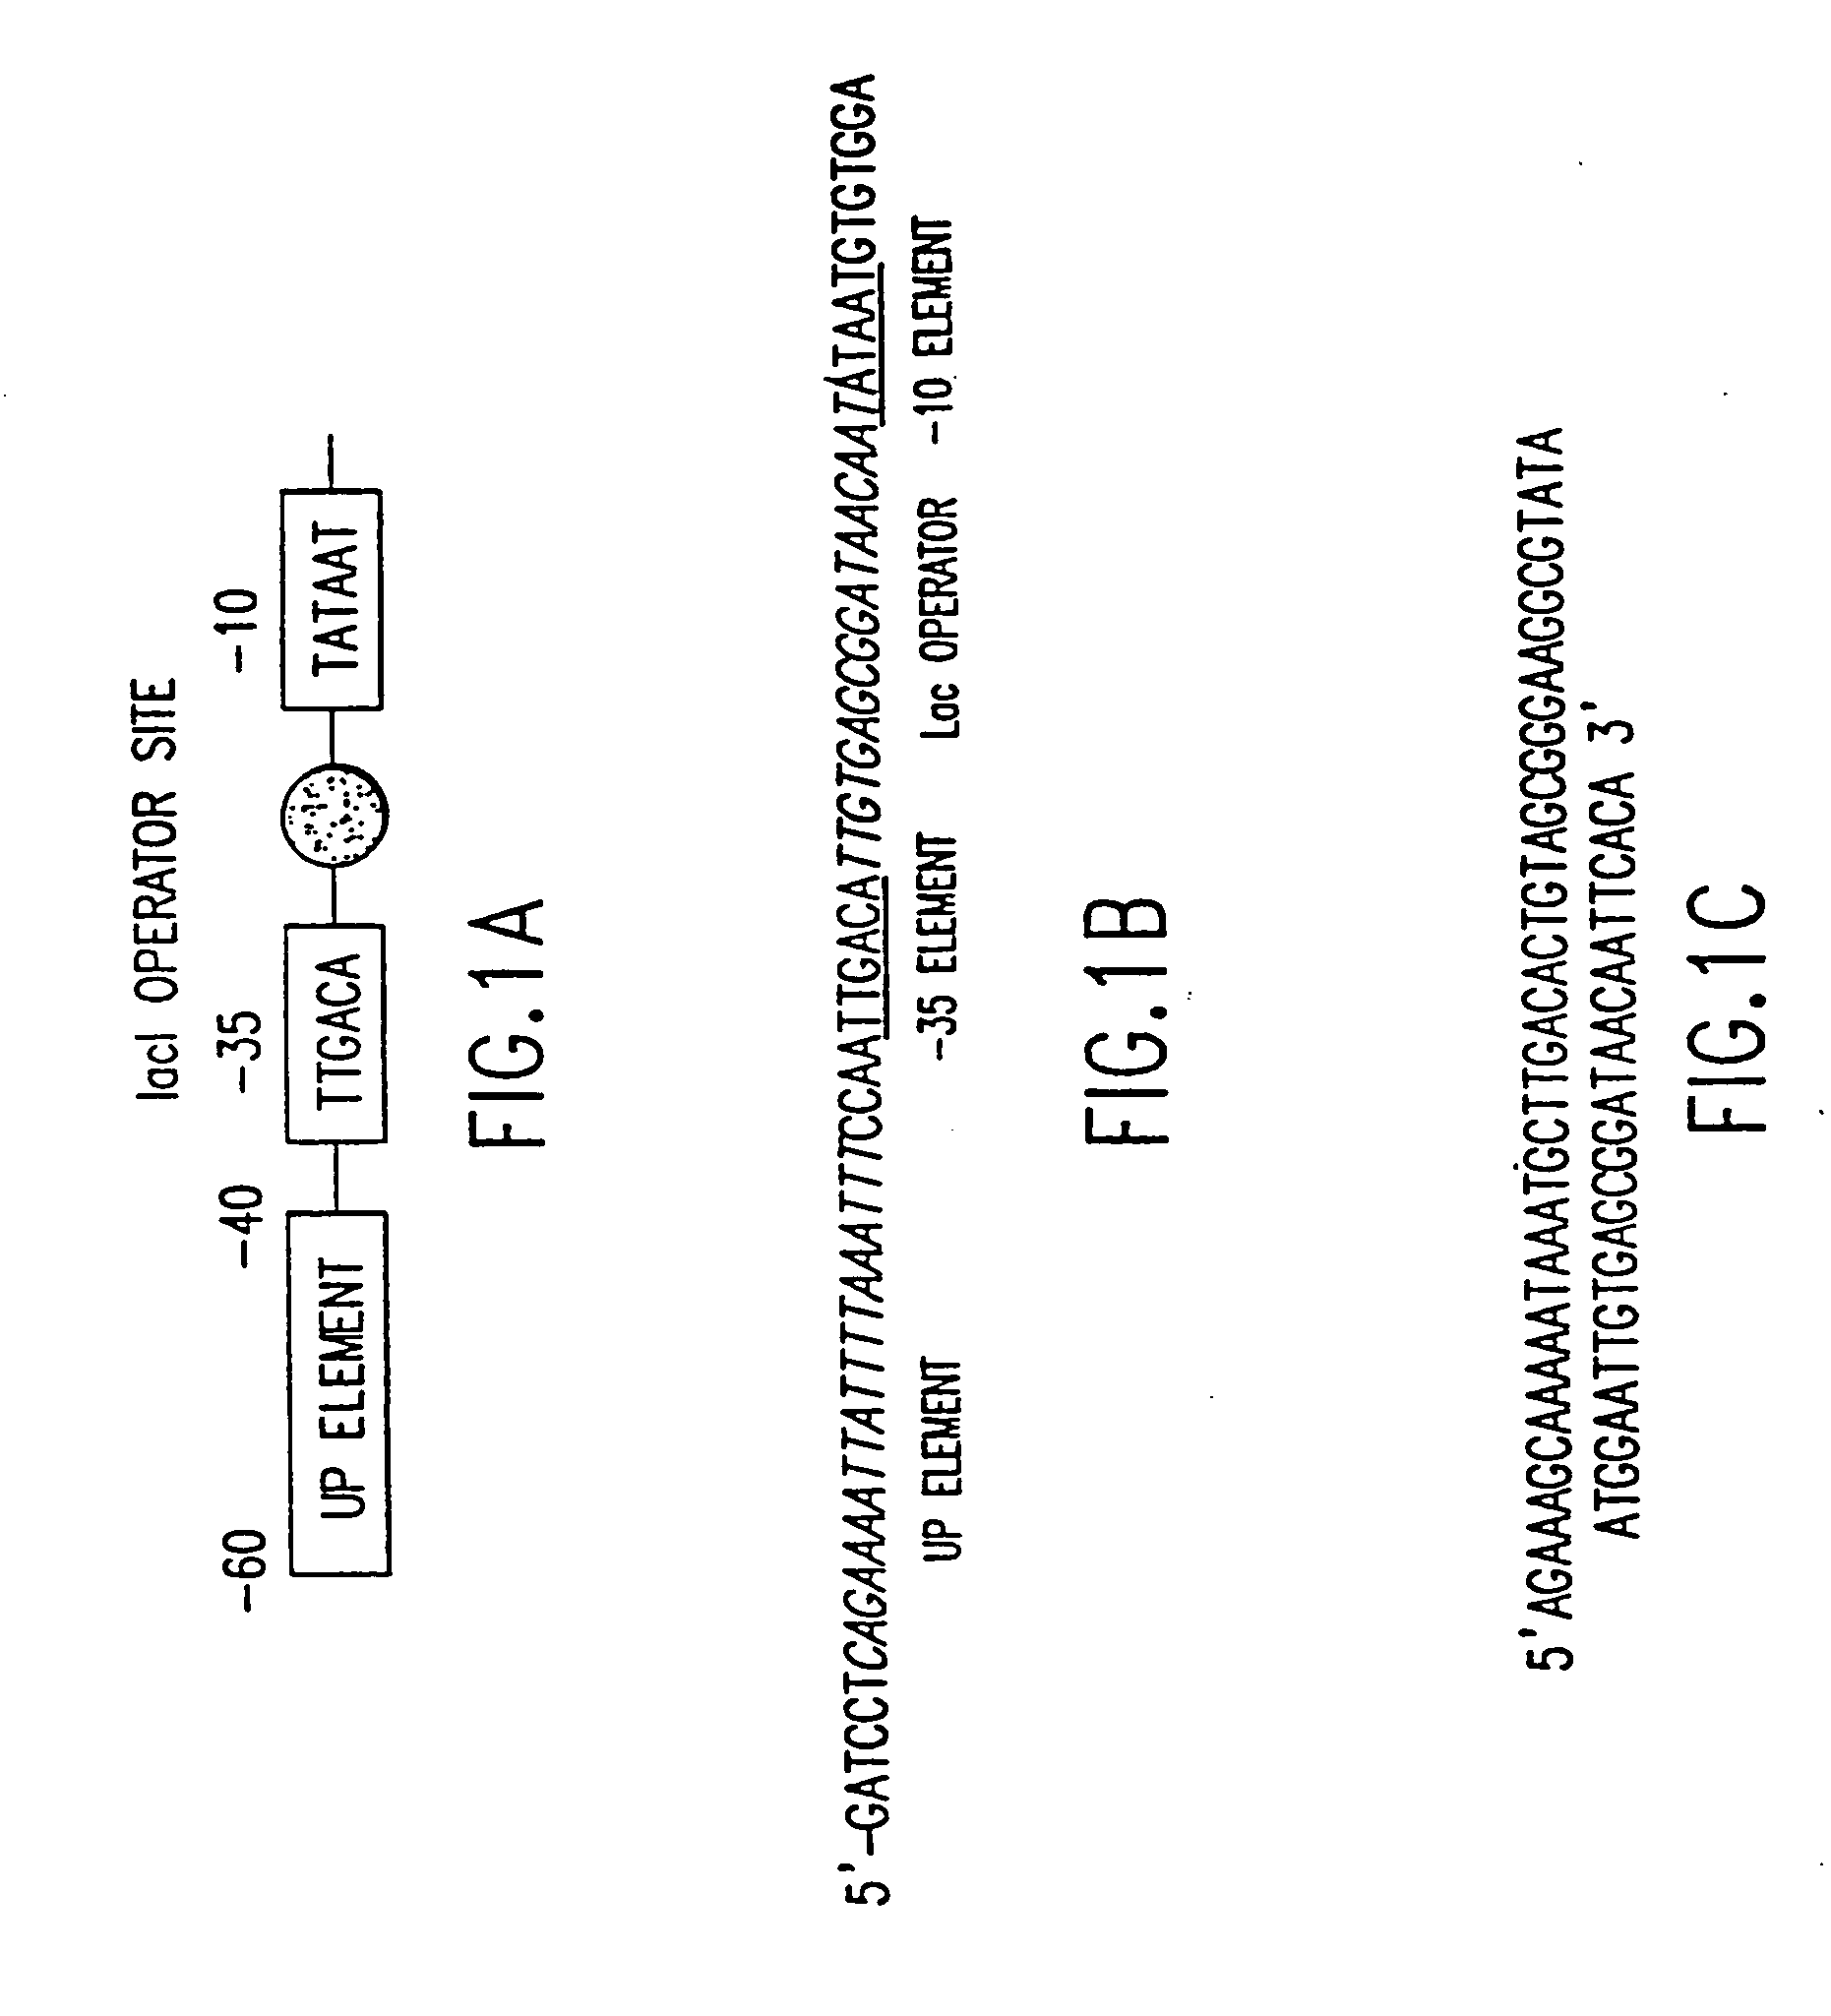 Tissue-specific and pathogen-specific toxic agents, ribozymes, dnazymes and antisense oligonucleotides, and methods of use thereof